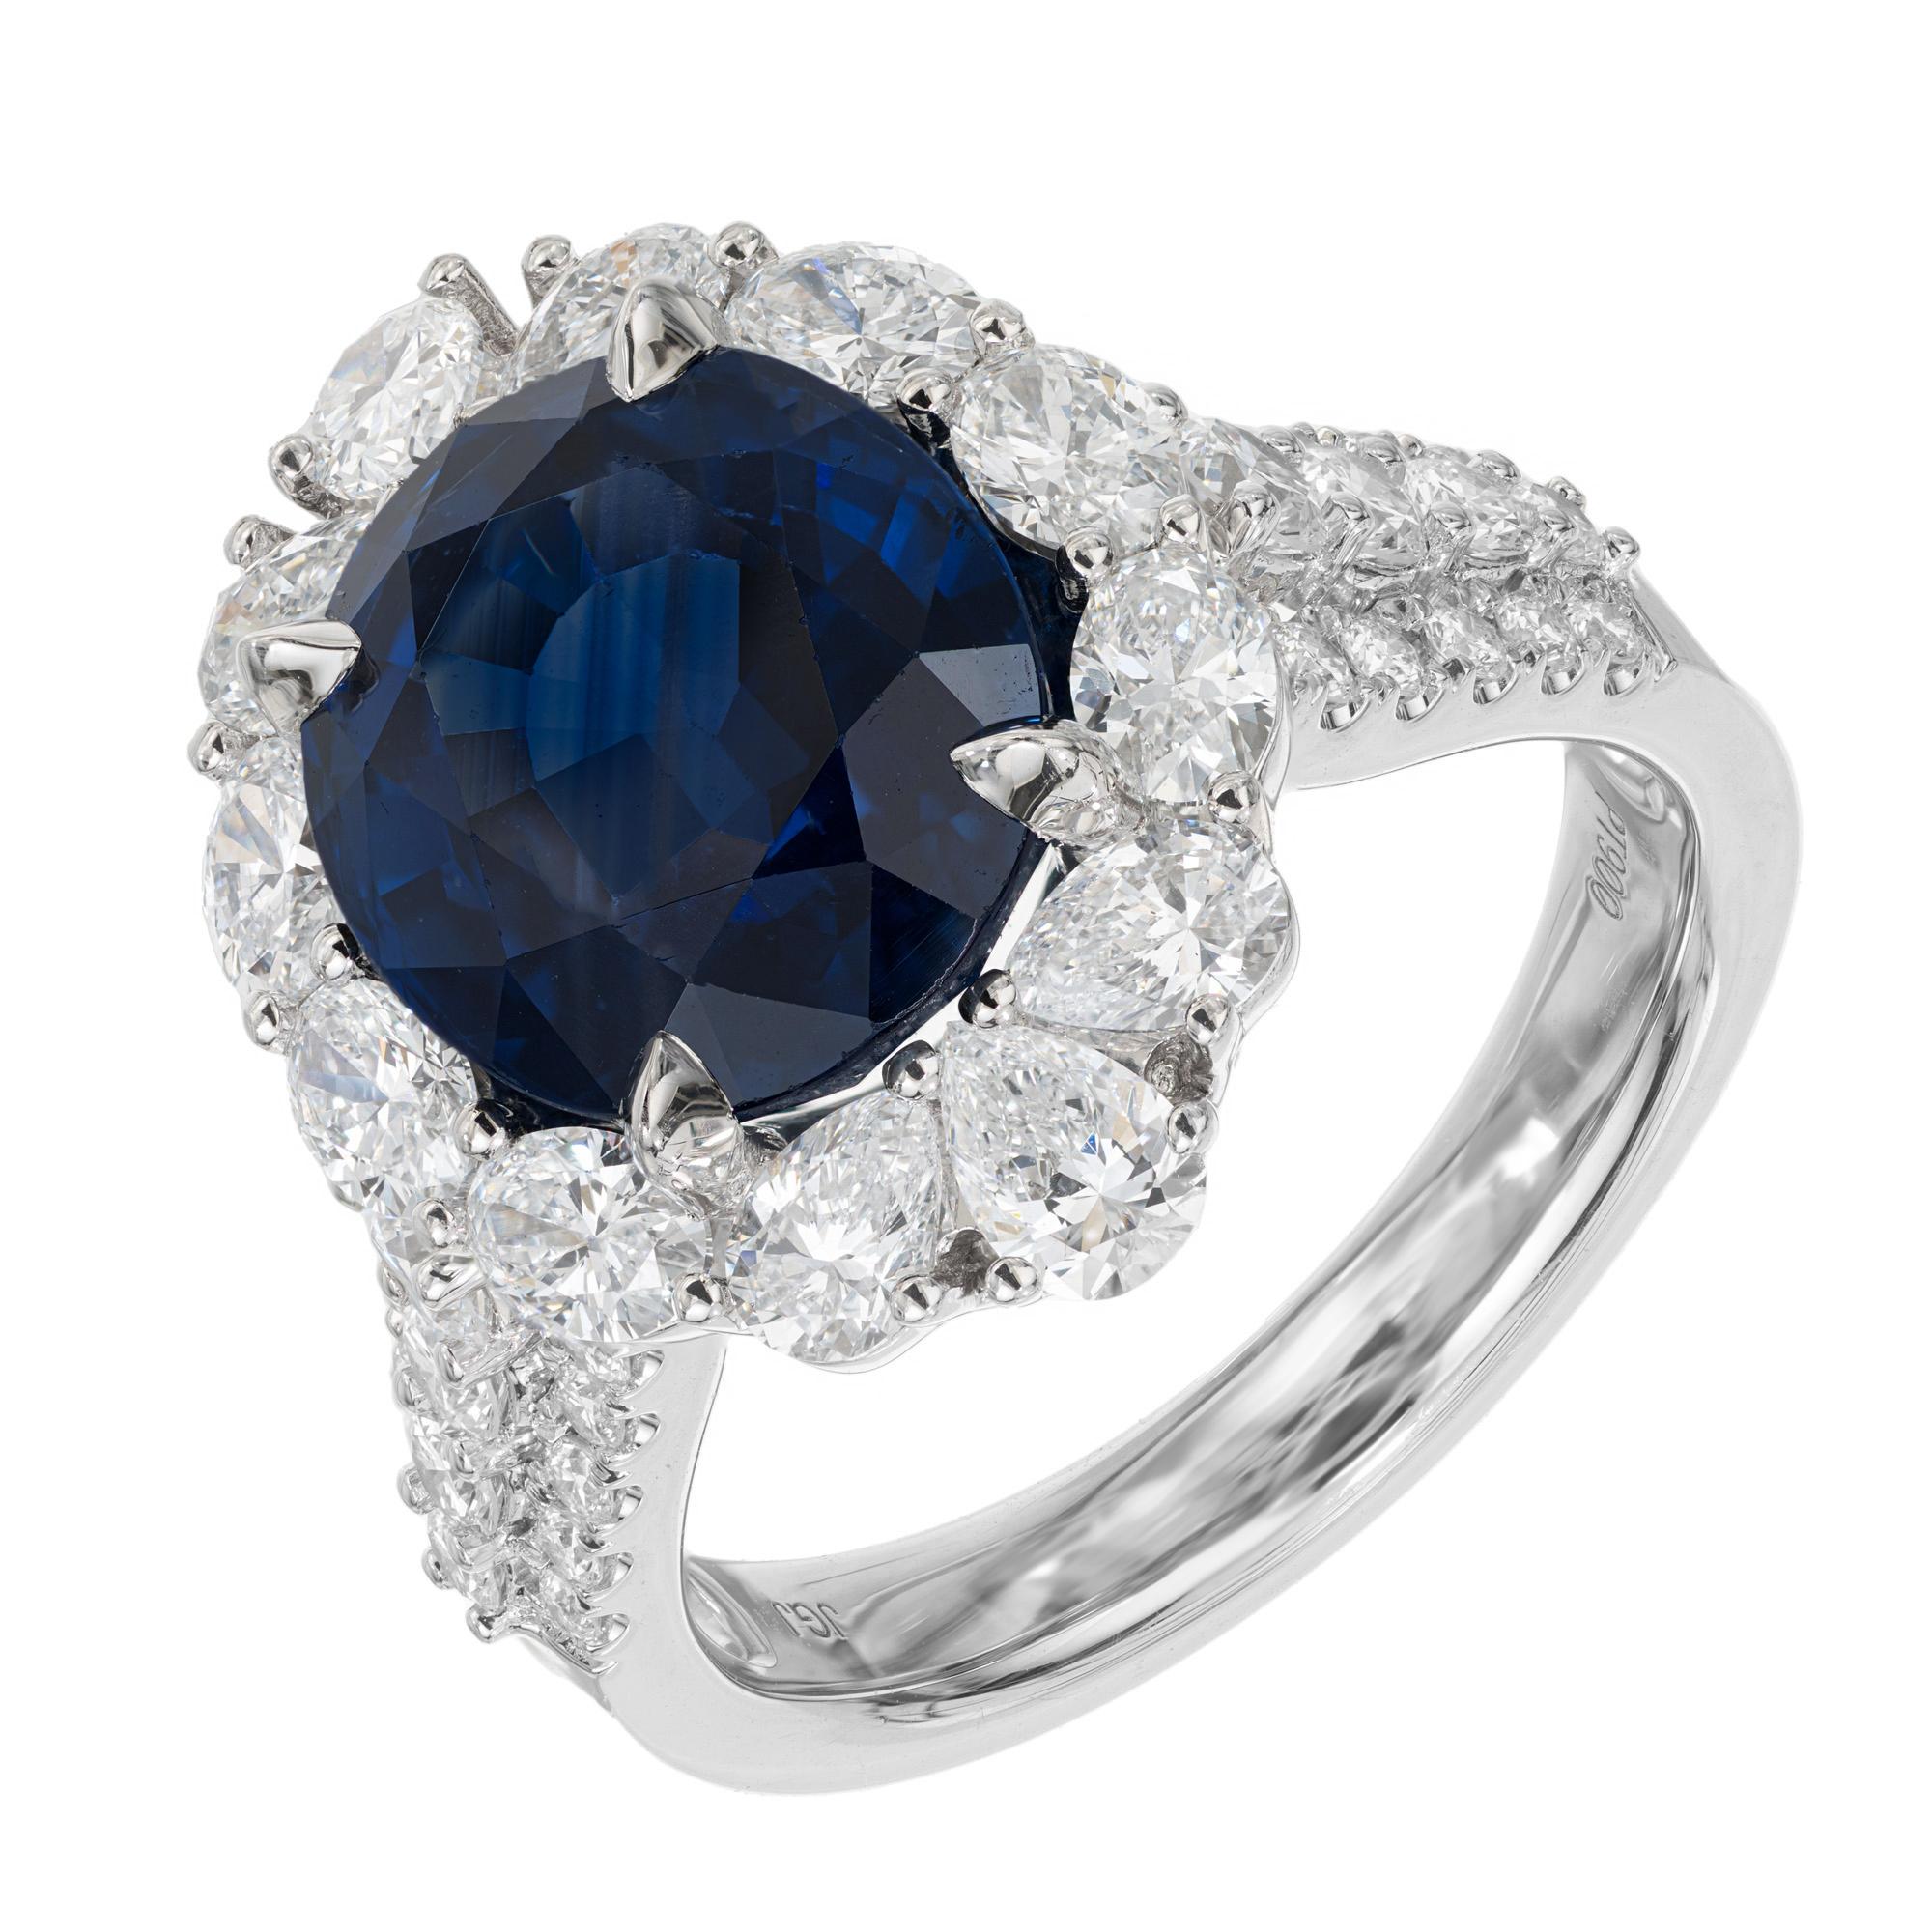 Stunning sapphire and diamond engagement ring. GIA certified 6.66ct oval center sapphire, mounted in a platinum setting with a halo of round brilliant cut diamonds, accented with round brilliant cut diamonds in rows of three along both shoulders of